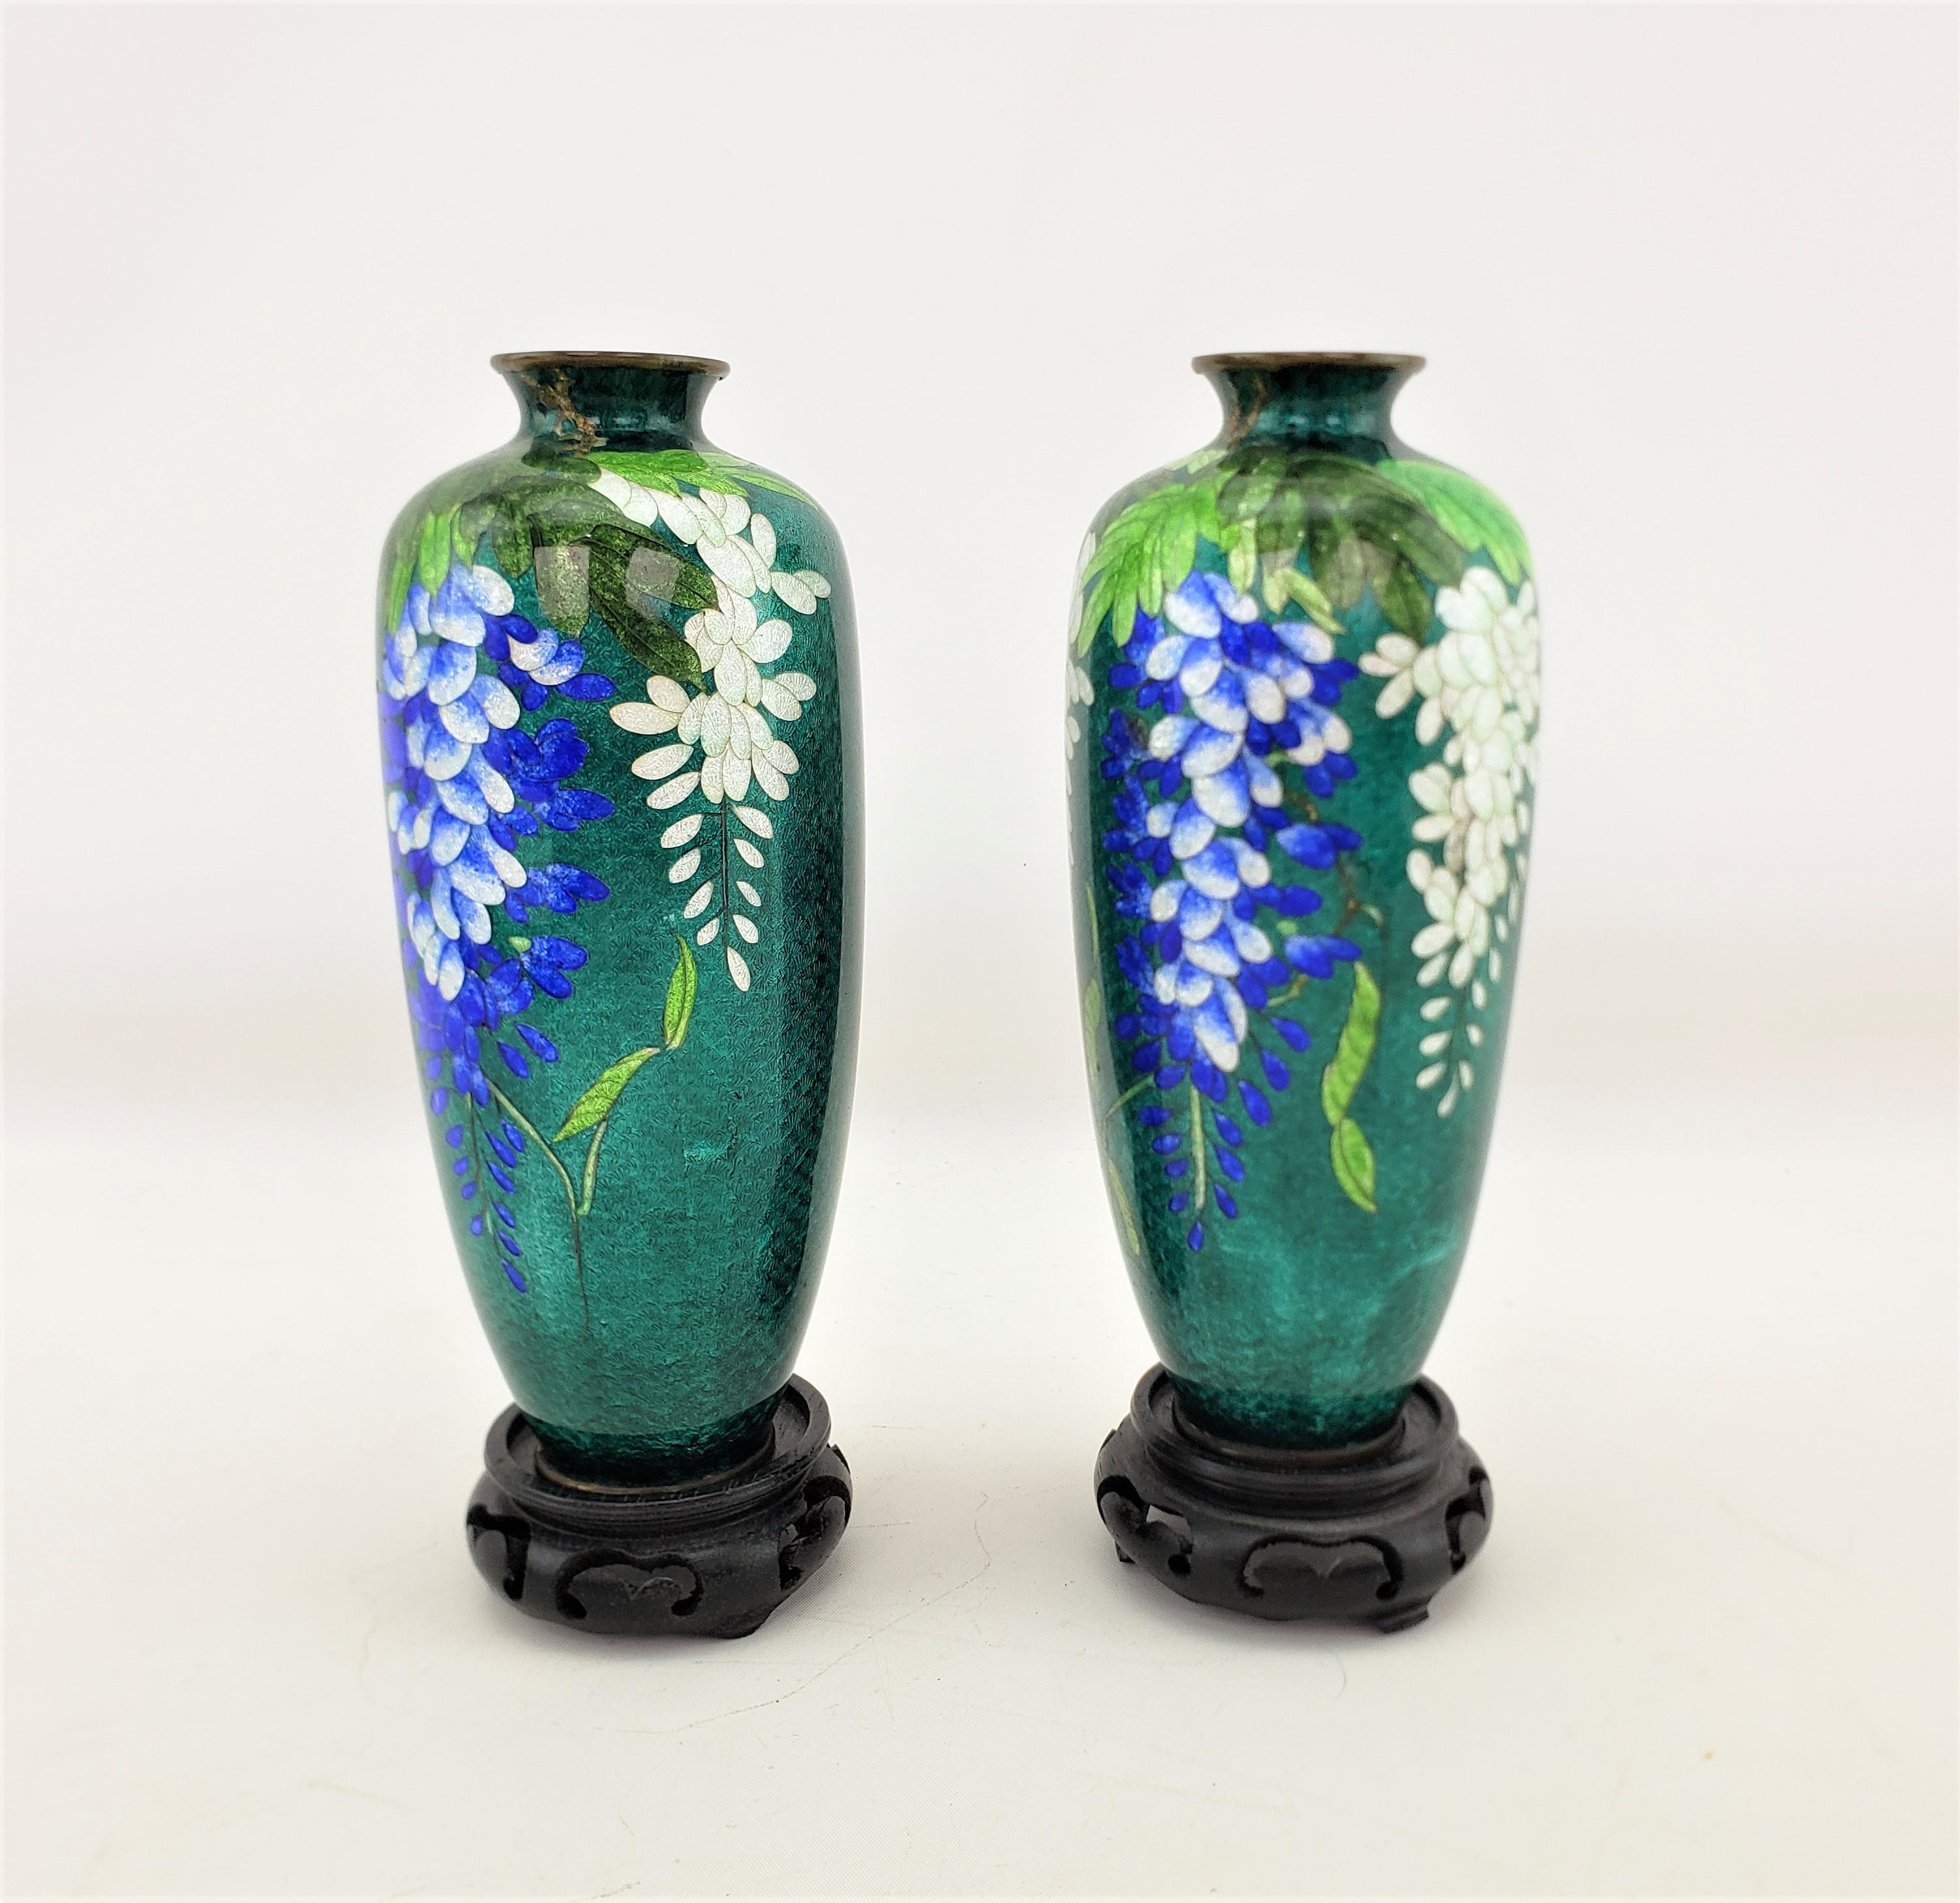 Anglo-Japanese Pair of Antique Japanese Cloisonne Vases with Floral Decoration & Wooden Stands For Sale